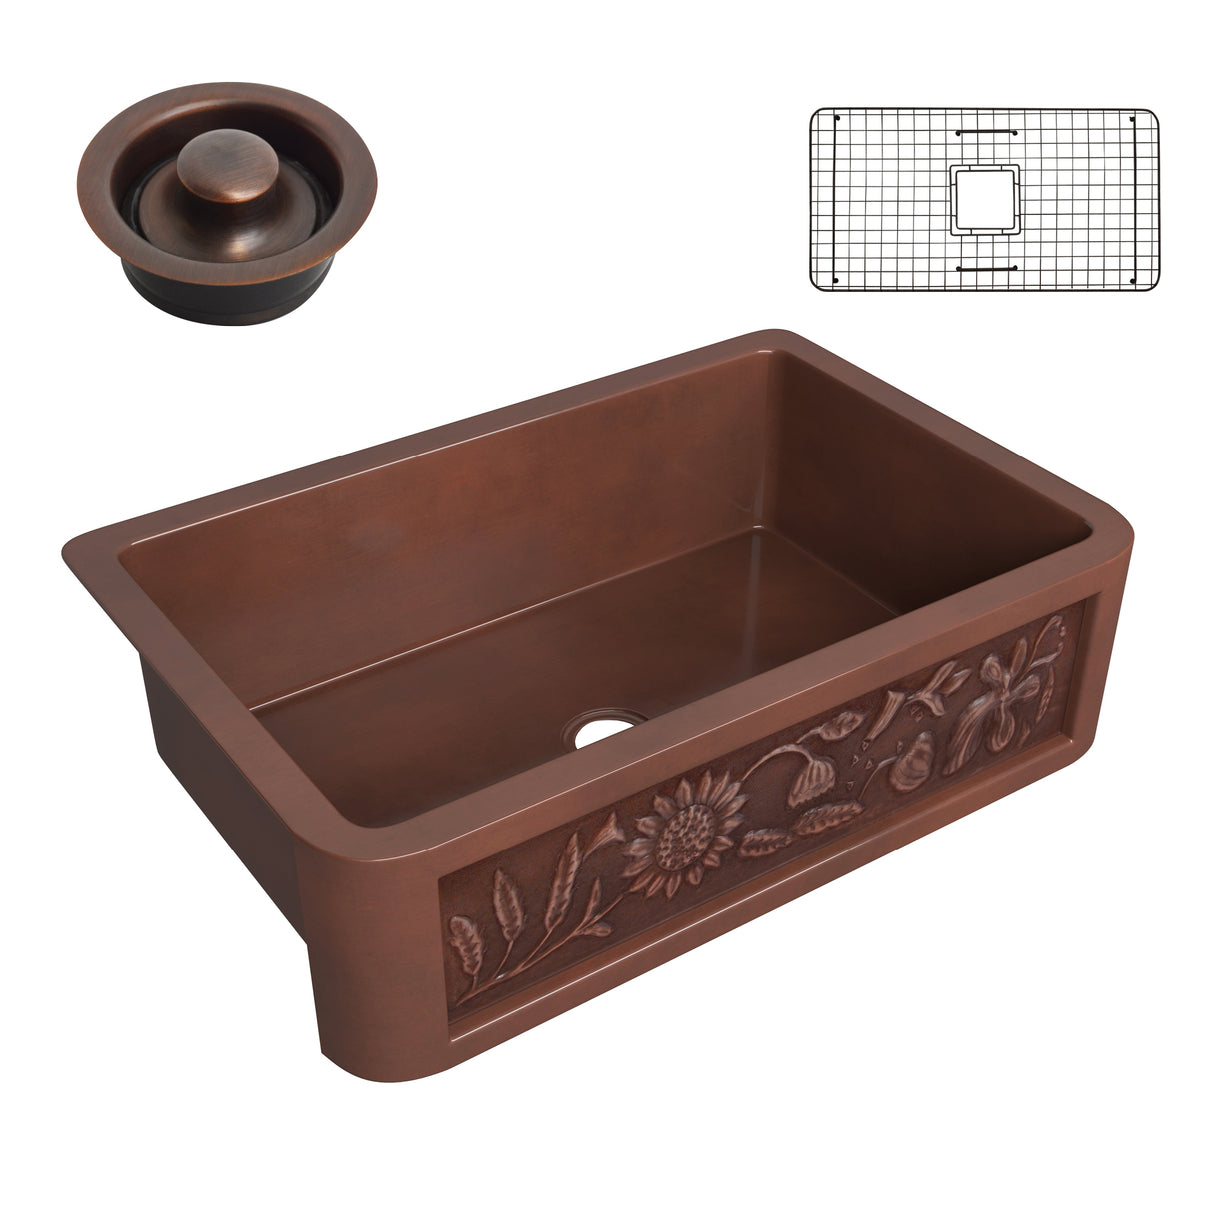 ANZZI SK-012 Anatolian Farmhouse Handmade Copper 33 in. 0-Hole Single Bowl Kitchen Sink with Sunflower Design Panel in Polished Antique Copper